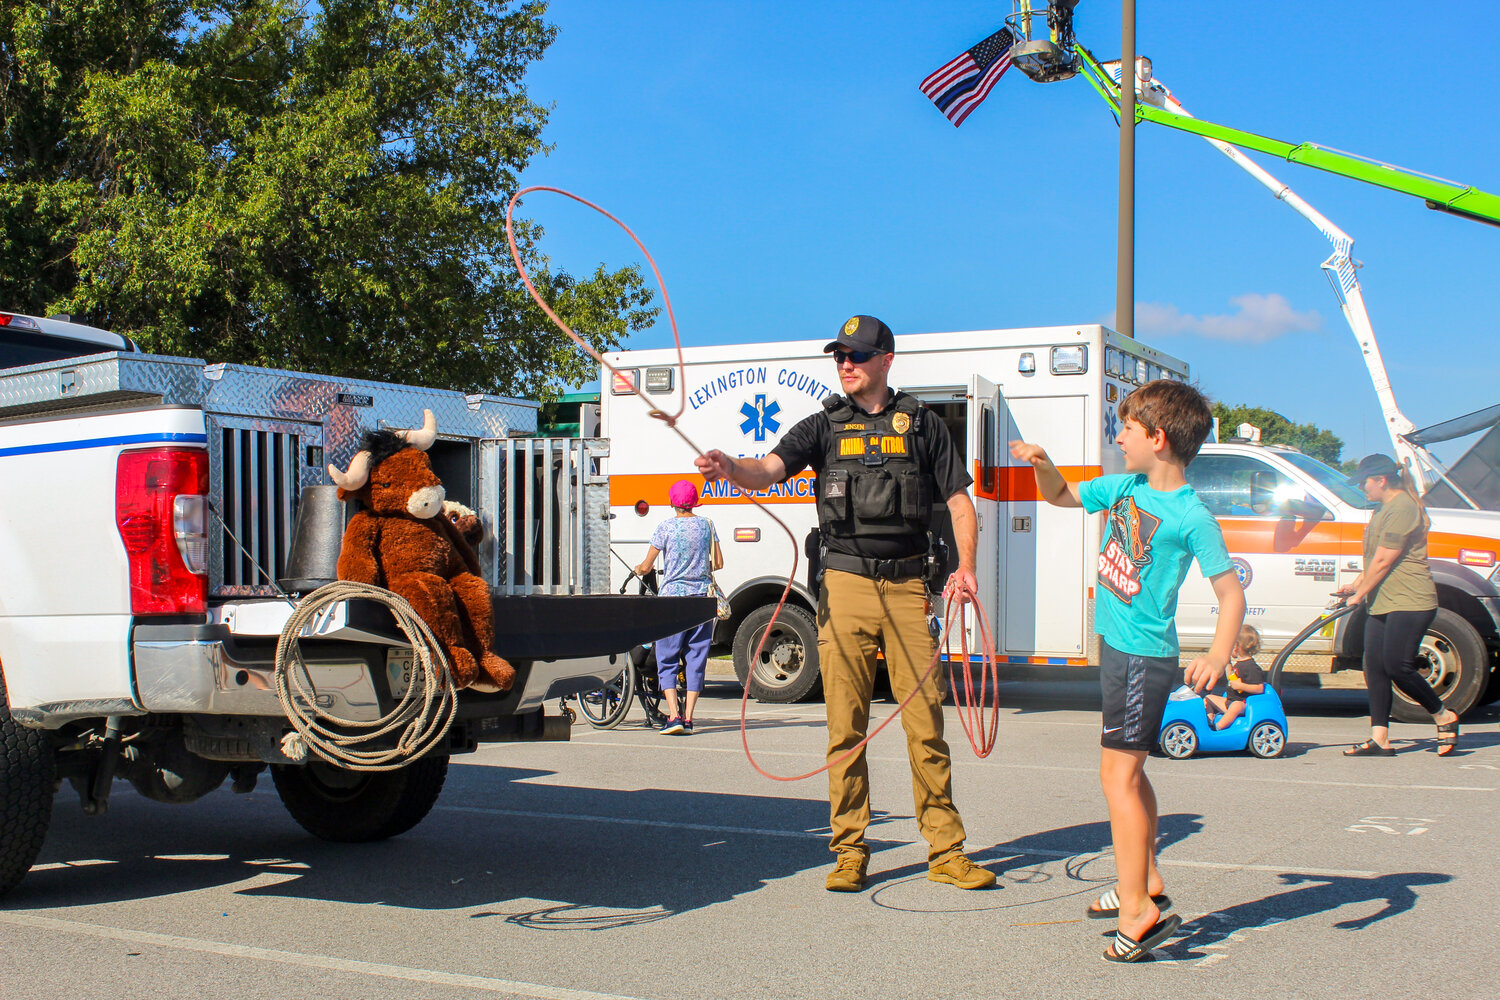 The Lexington County Sheriff's Department held a Touch a Truck event at Lexington High School Aug. 5.